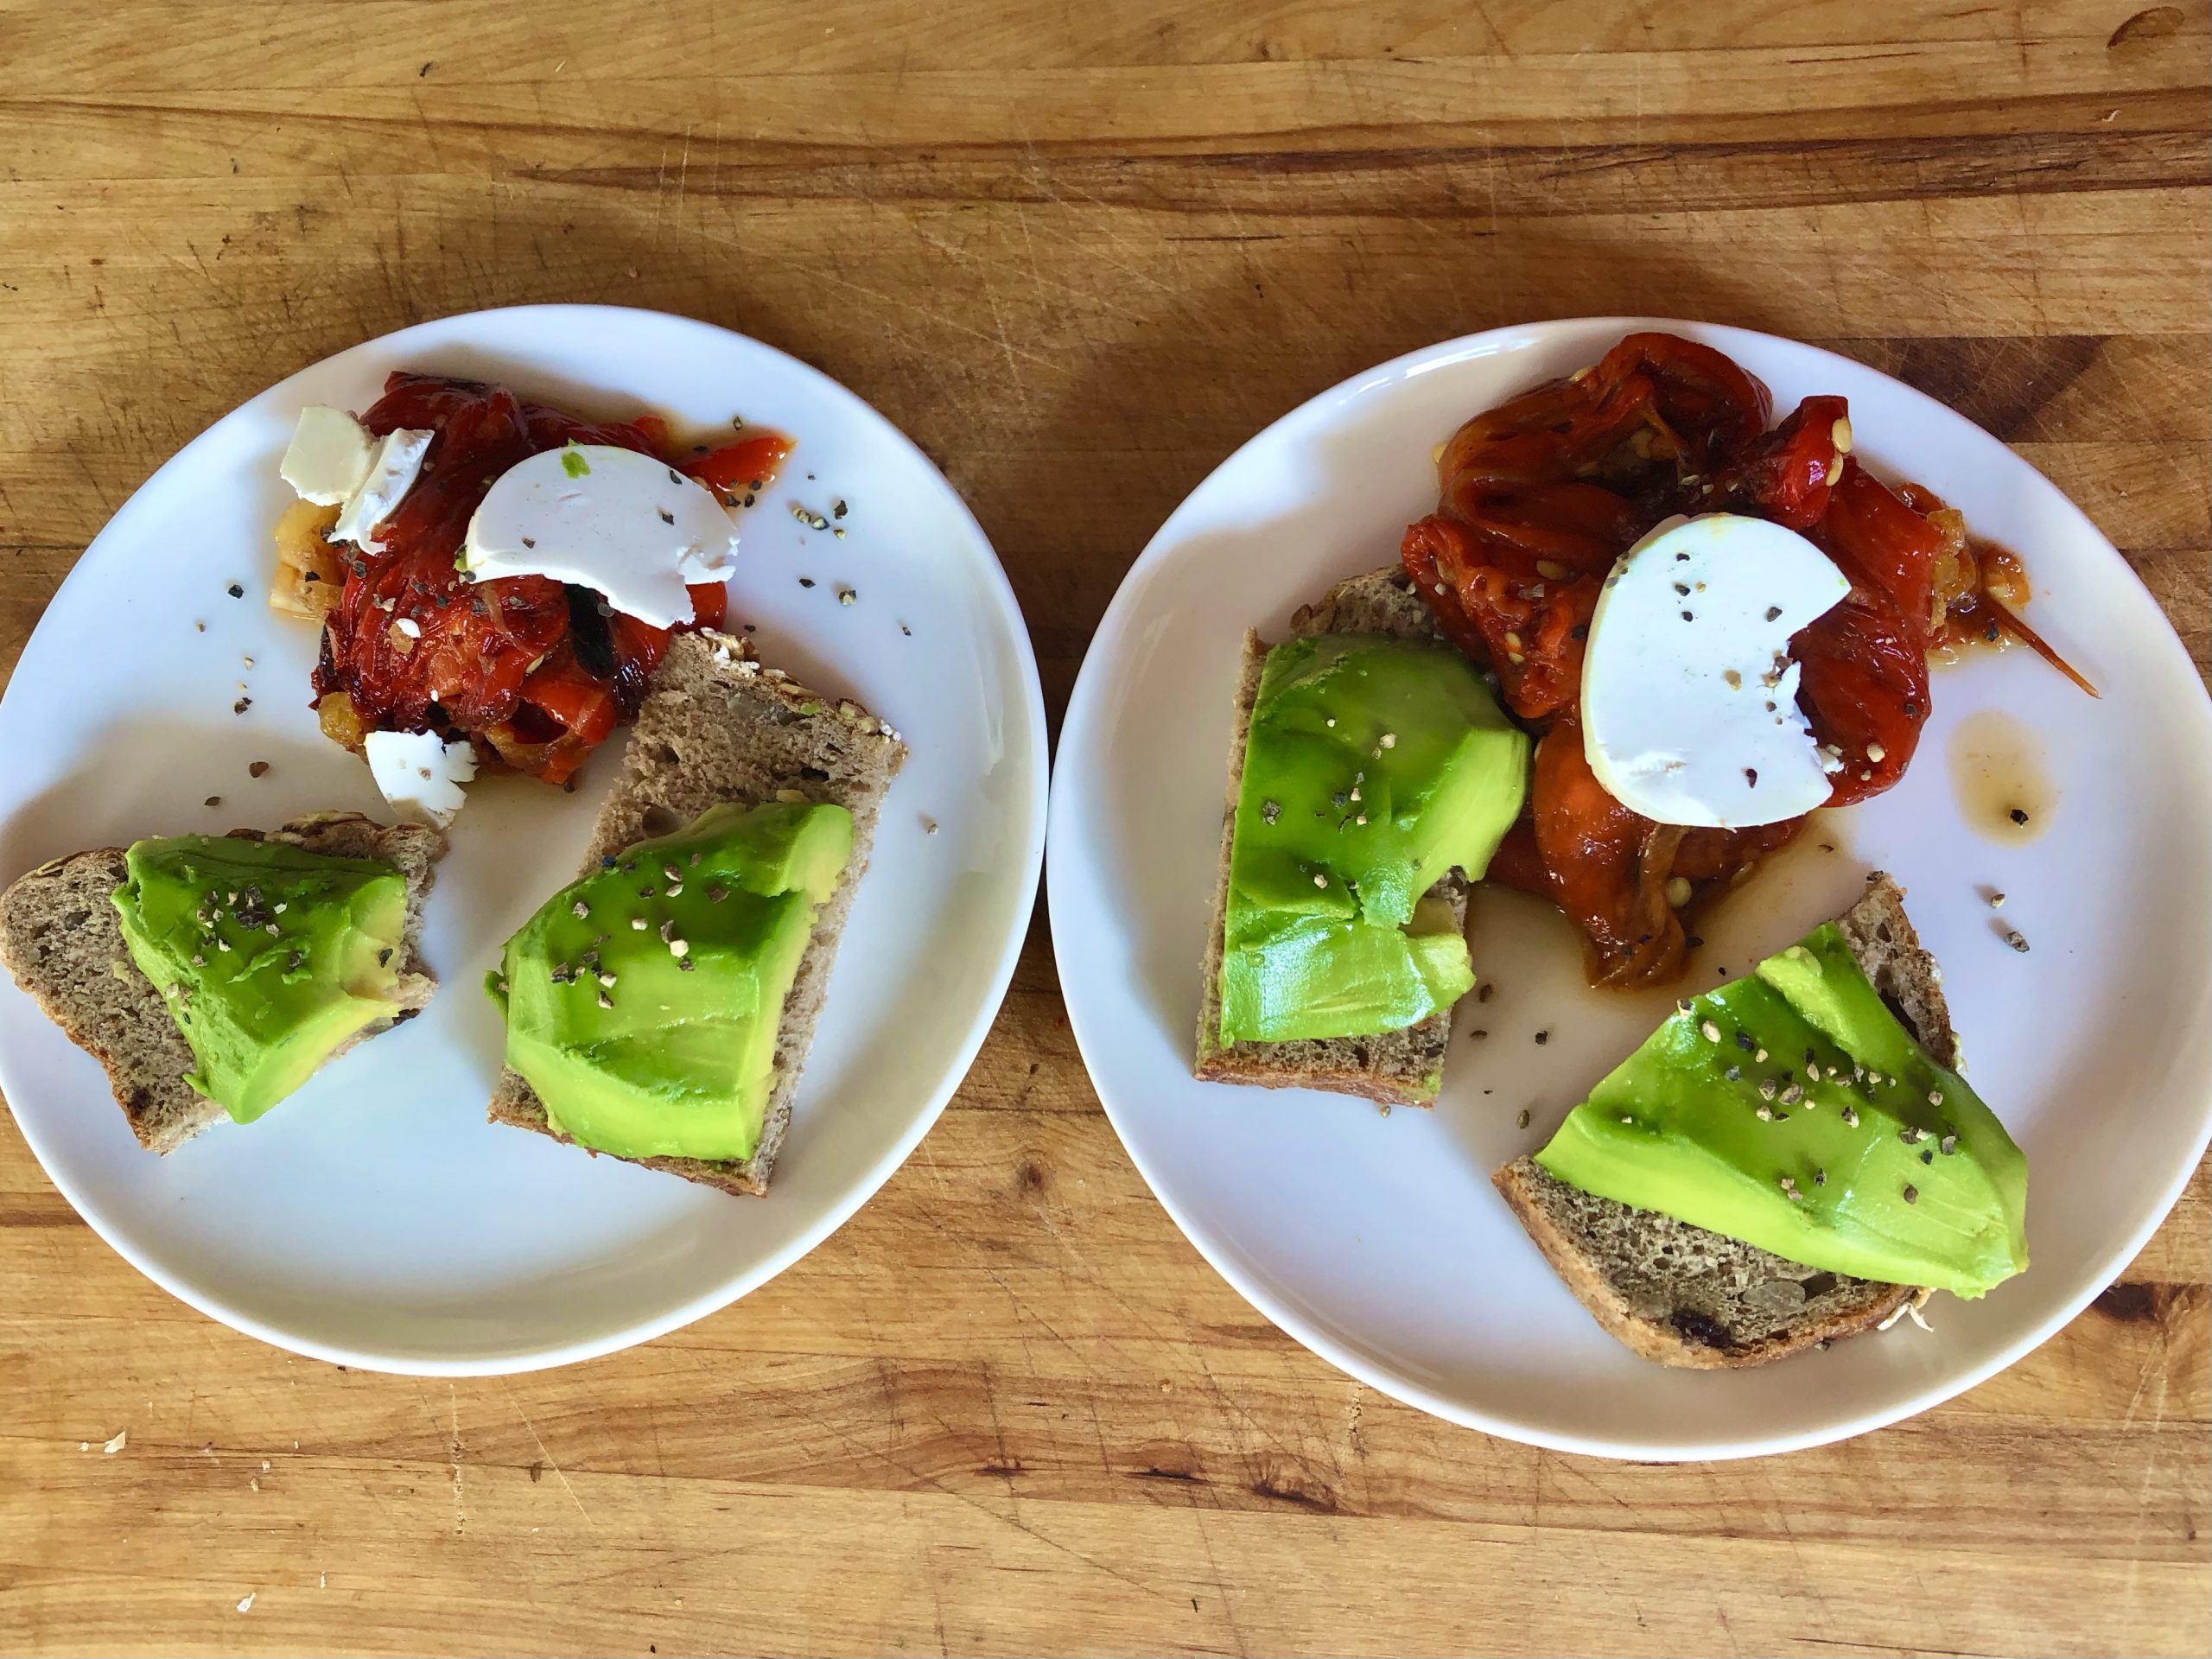 Tapas: Rye bread toast with avocado and Romano peppers